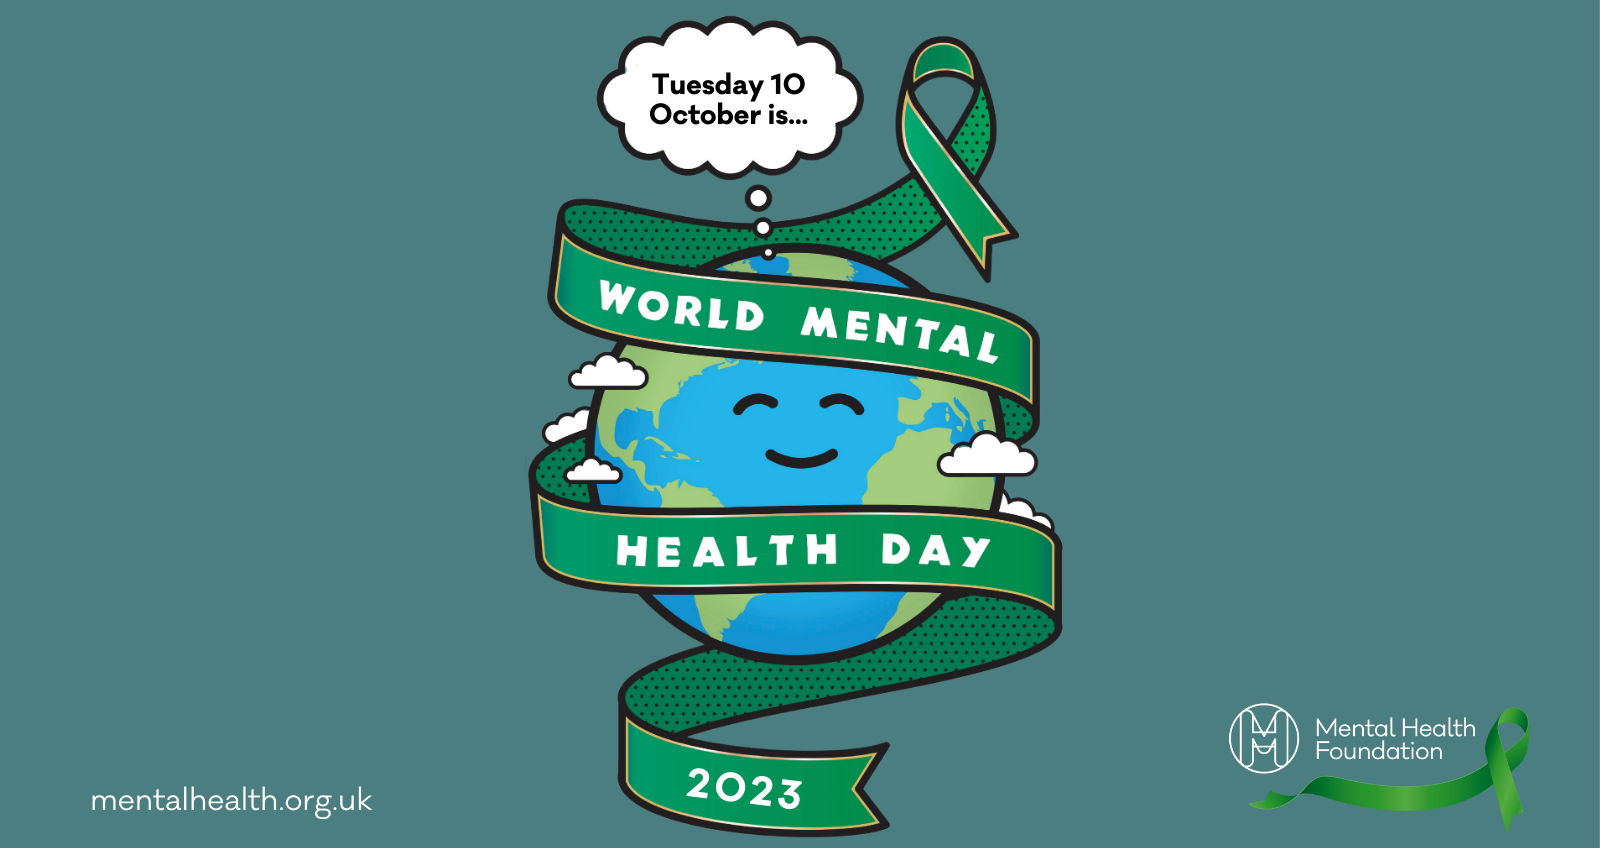 Green background with an illustrated smiling globe. Text reads "Tuesday 10 October is... World Mental Health Day 2023